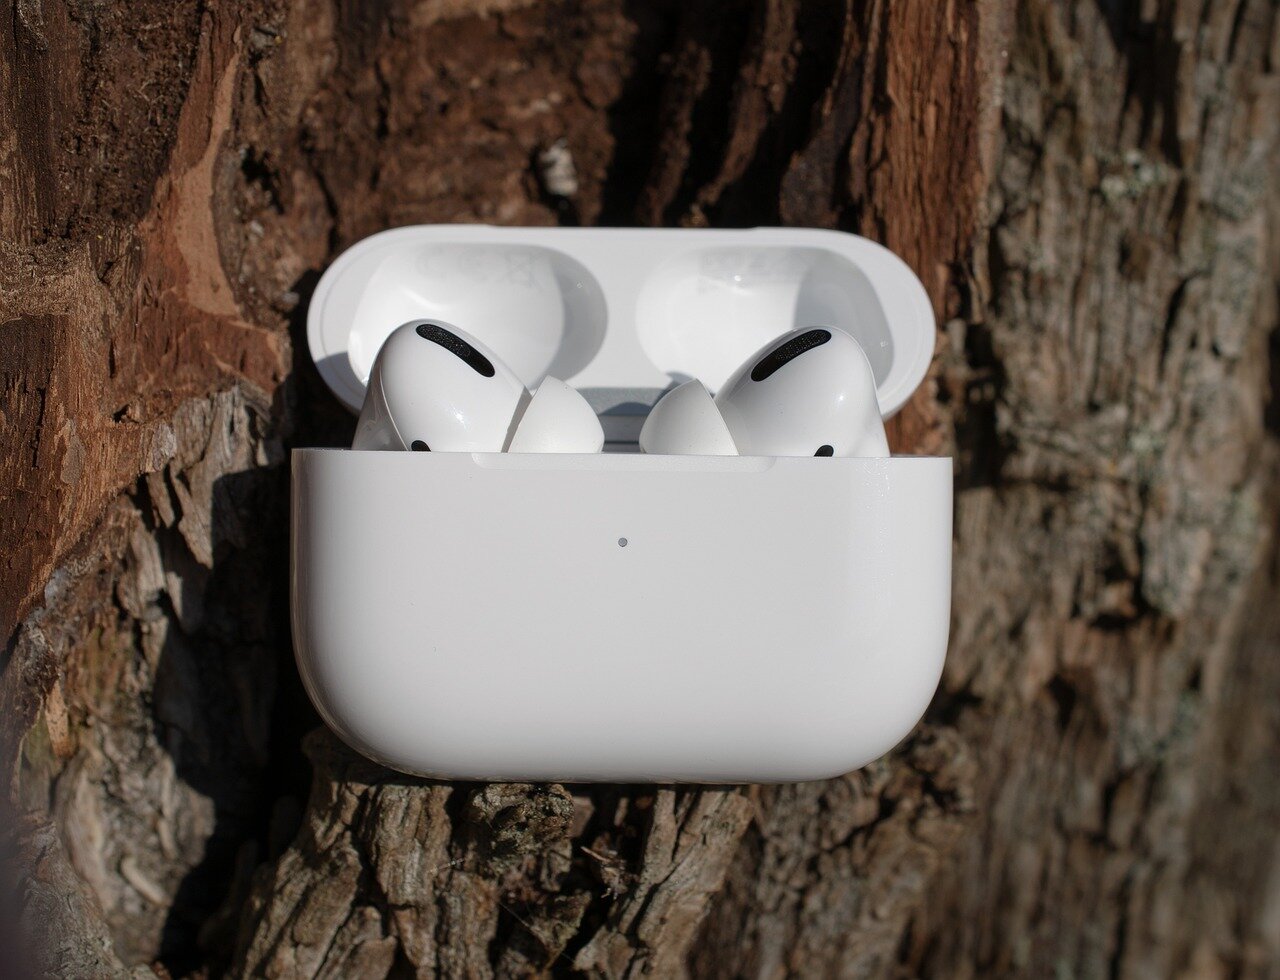 Apple will change the charging port of all AirPods to USB-C, starting with AirPods Pro – Apple